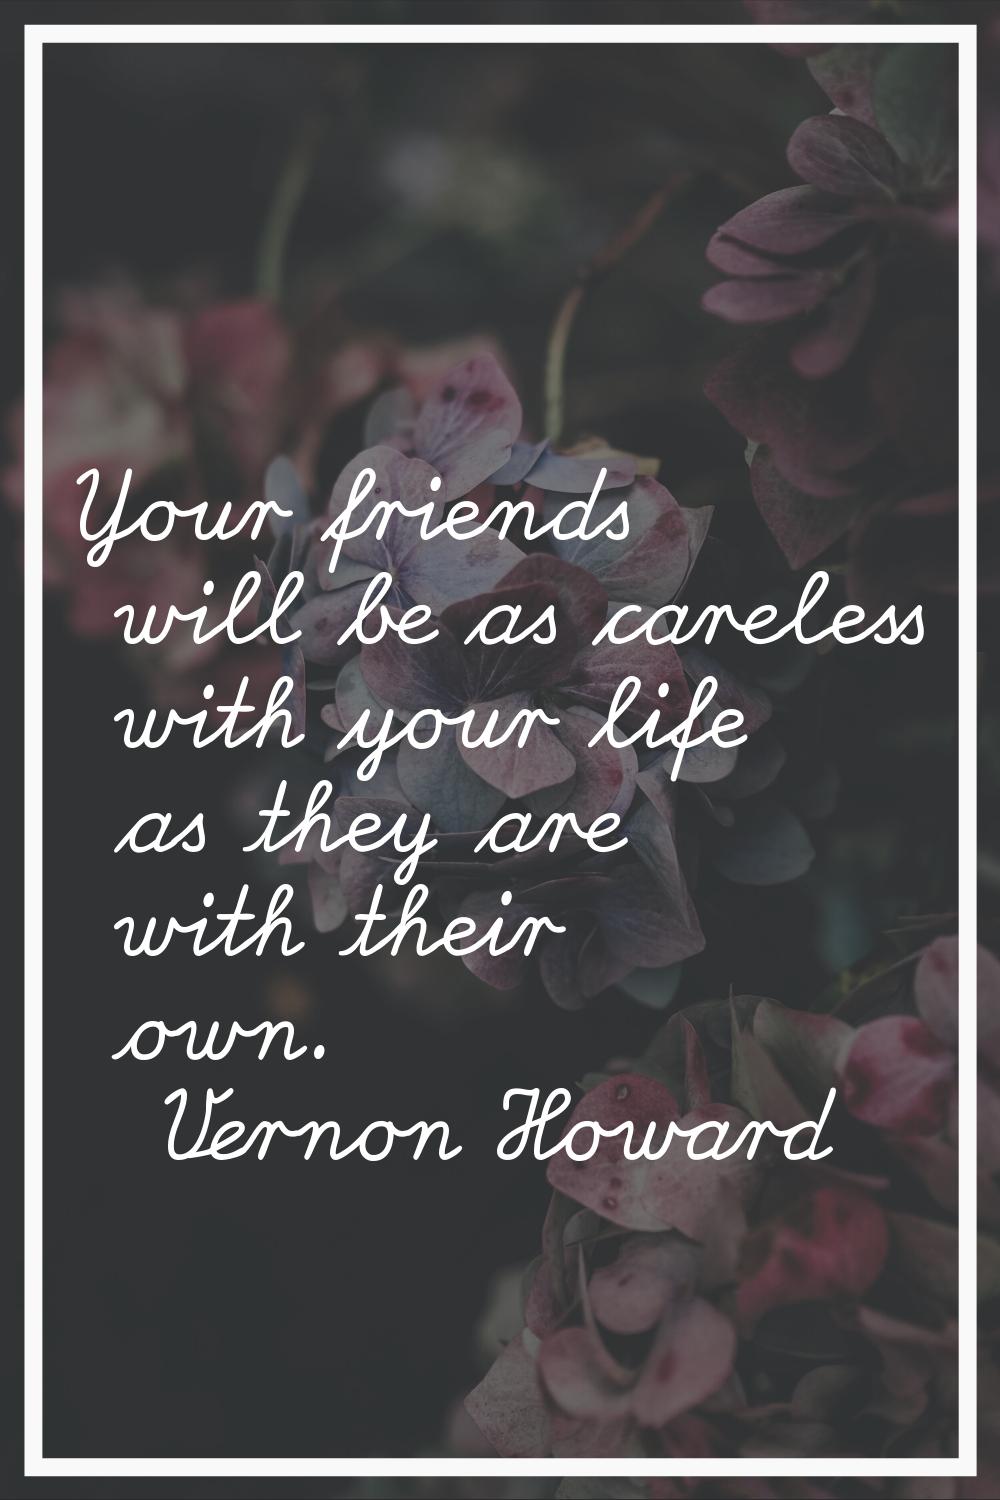 Your friends will be as careless with your life as they are with their own.